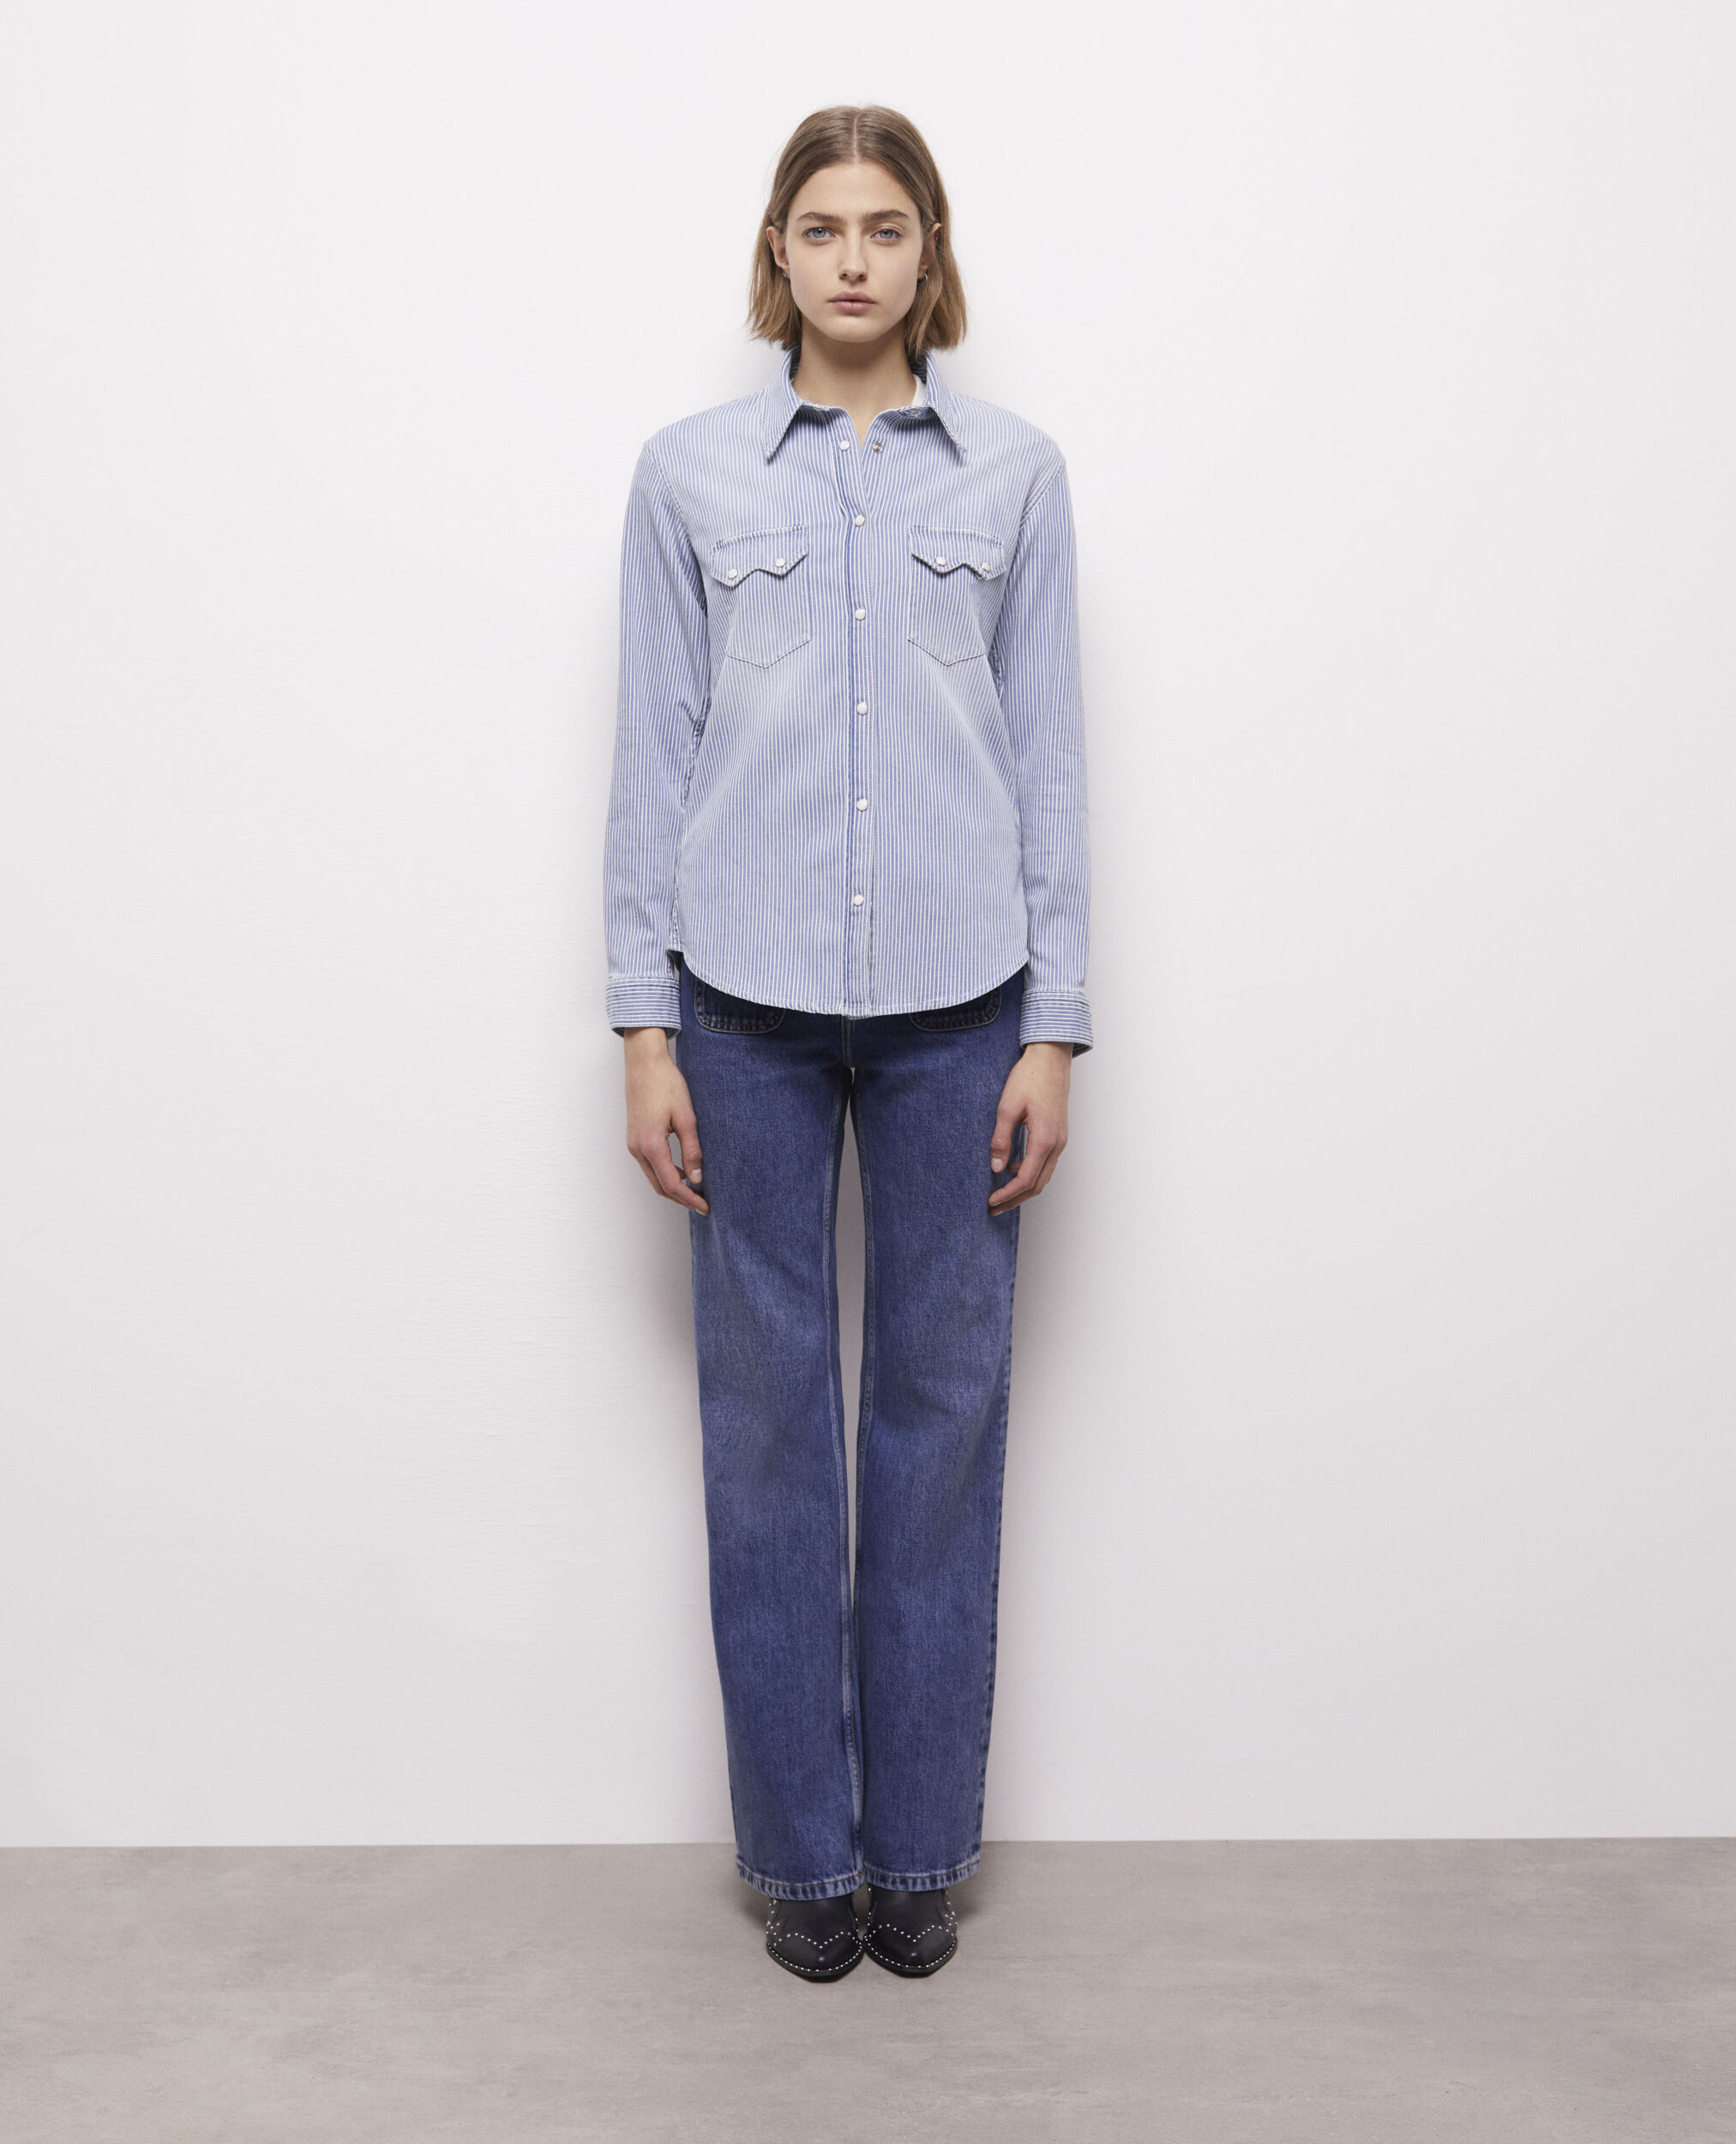 Chemise à rayures bleues et blanches, BLUE DENIM, hi-res image number null